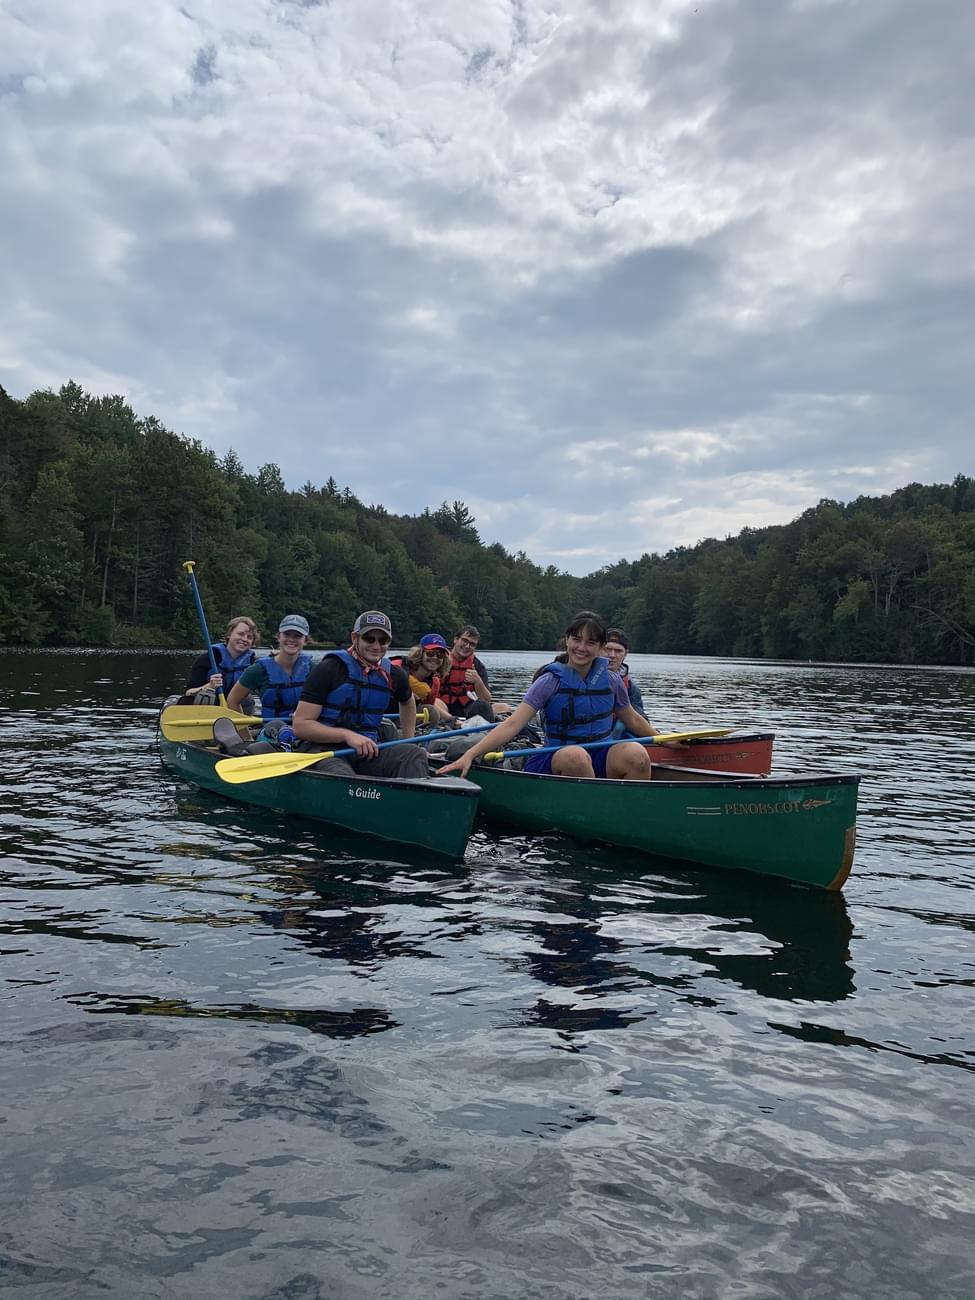 Students in canoes on a lake during Highlander Wilderness Adventure.